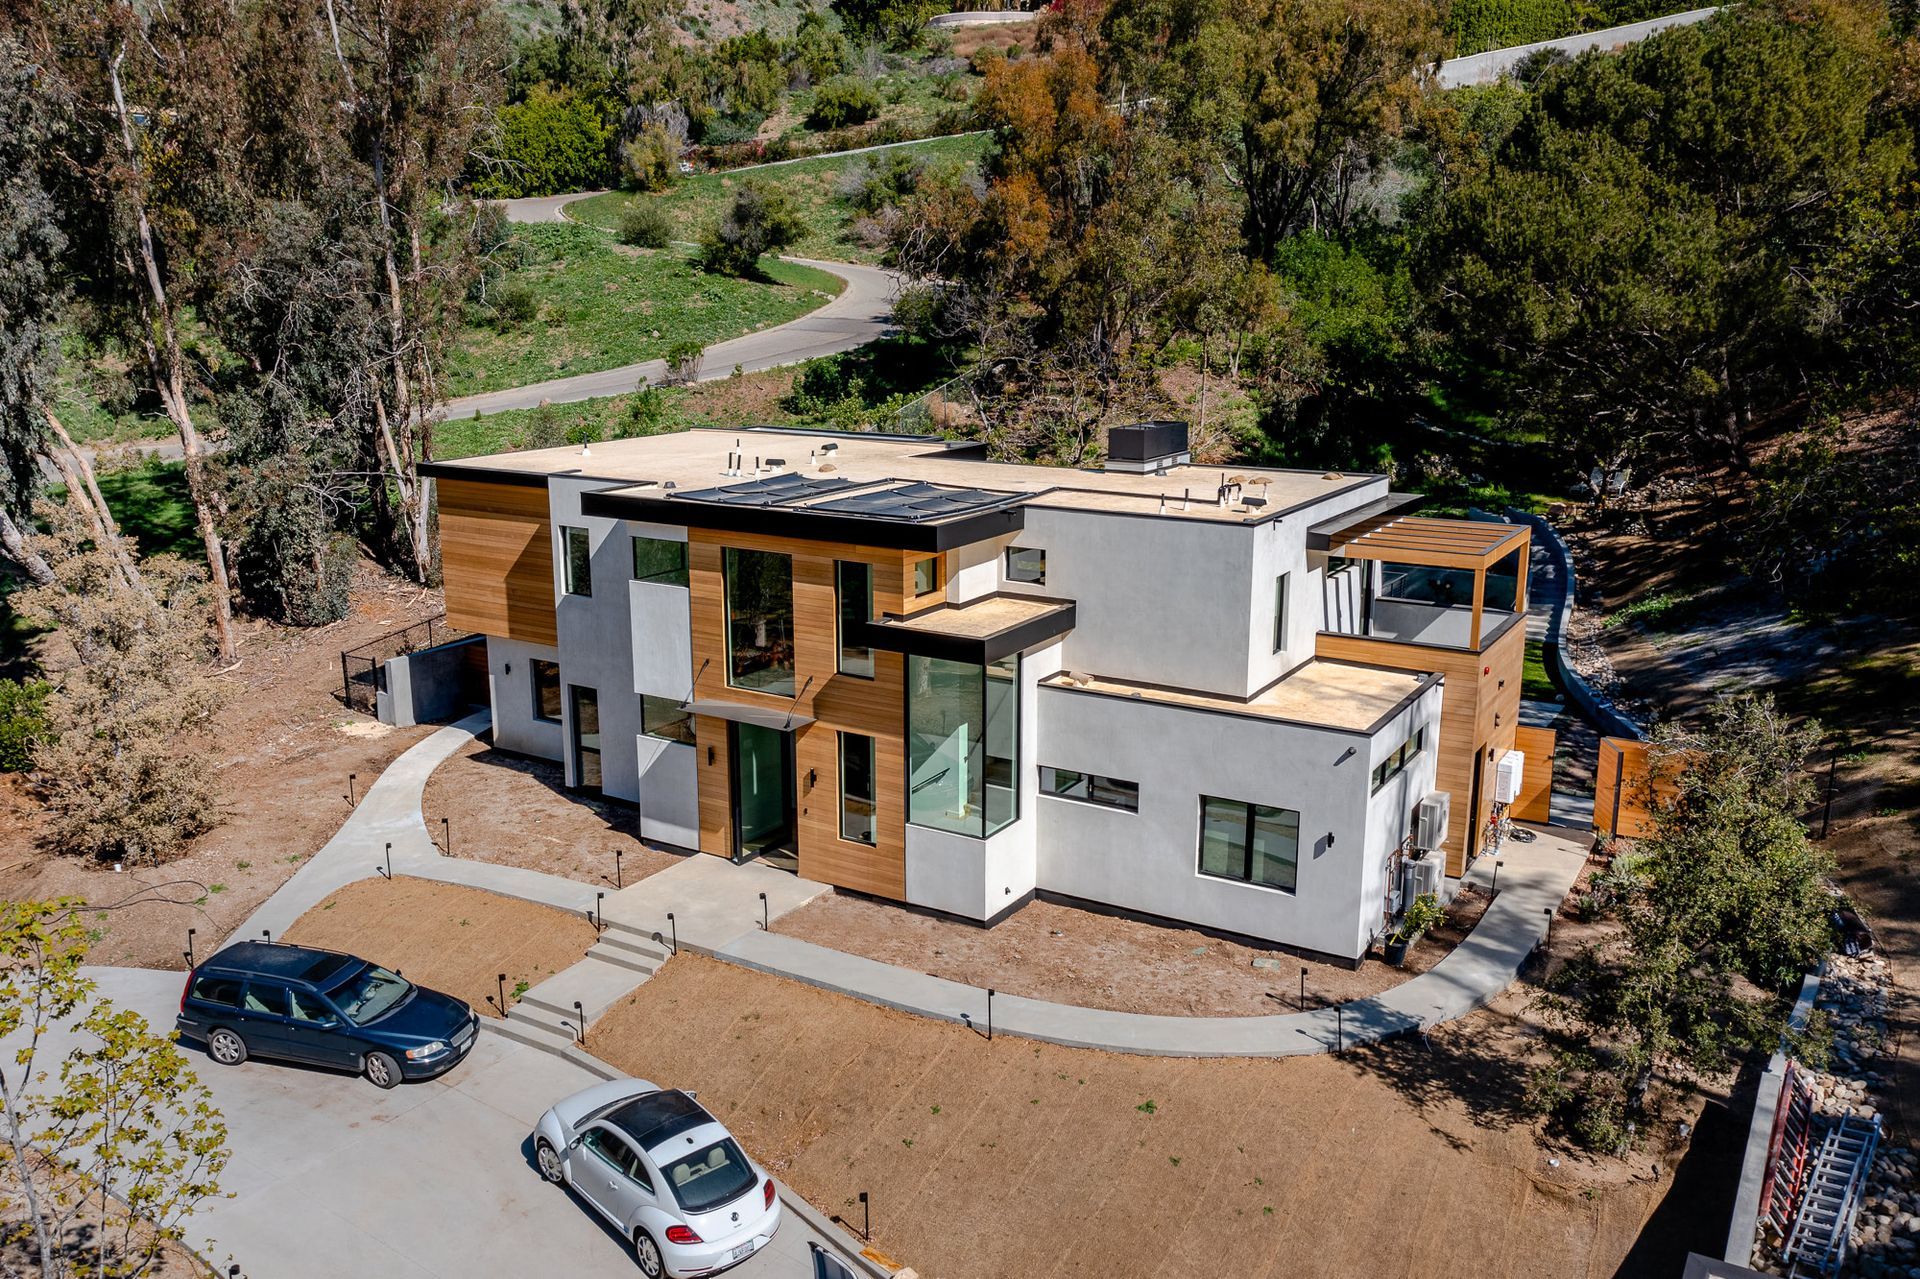 An aerial view of the Ramirez Canyon home in Malibu, CA, with cars parked in front of it